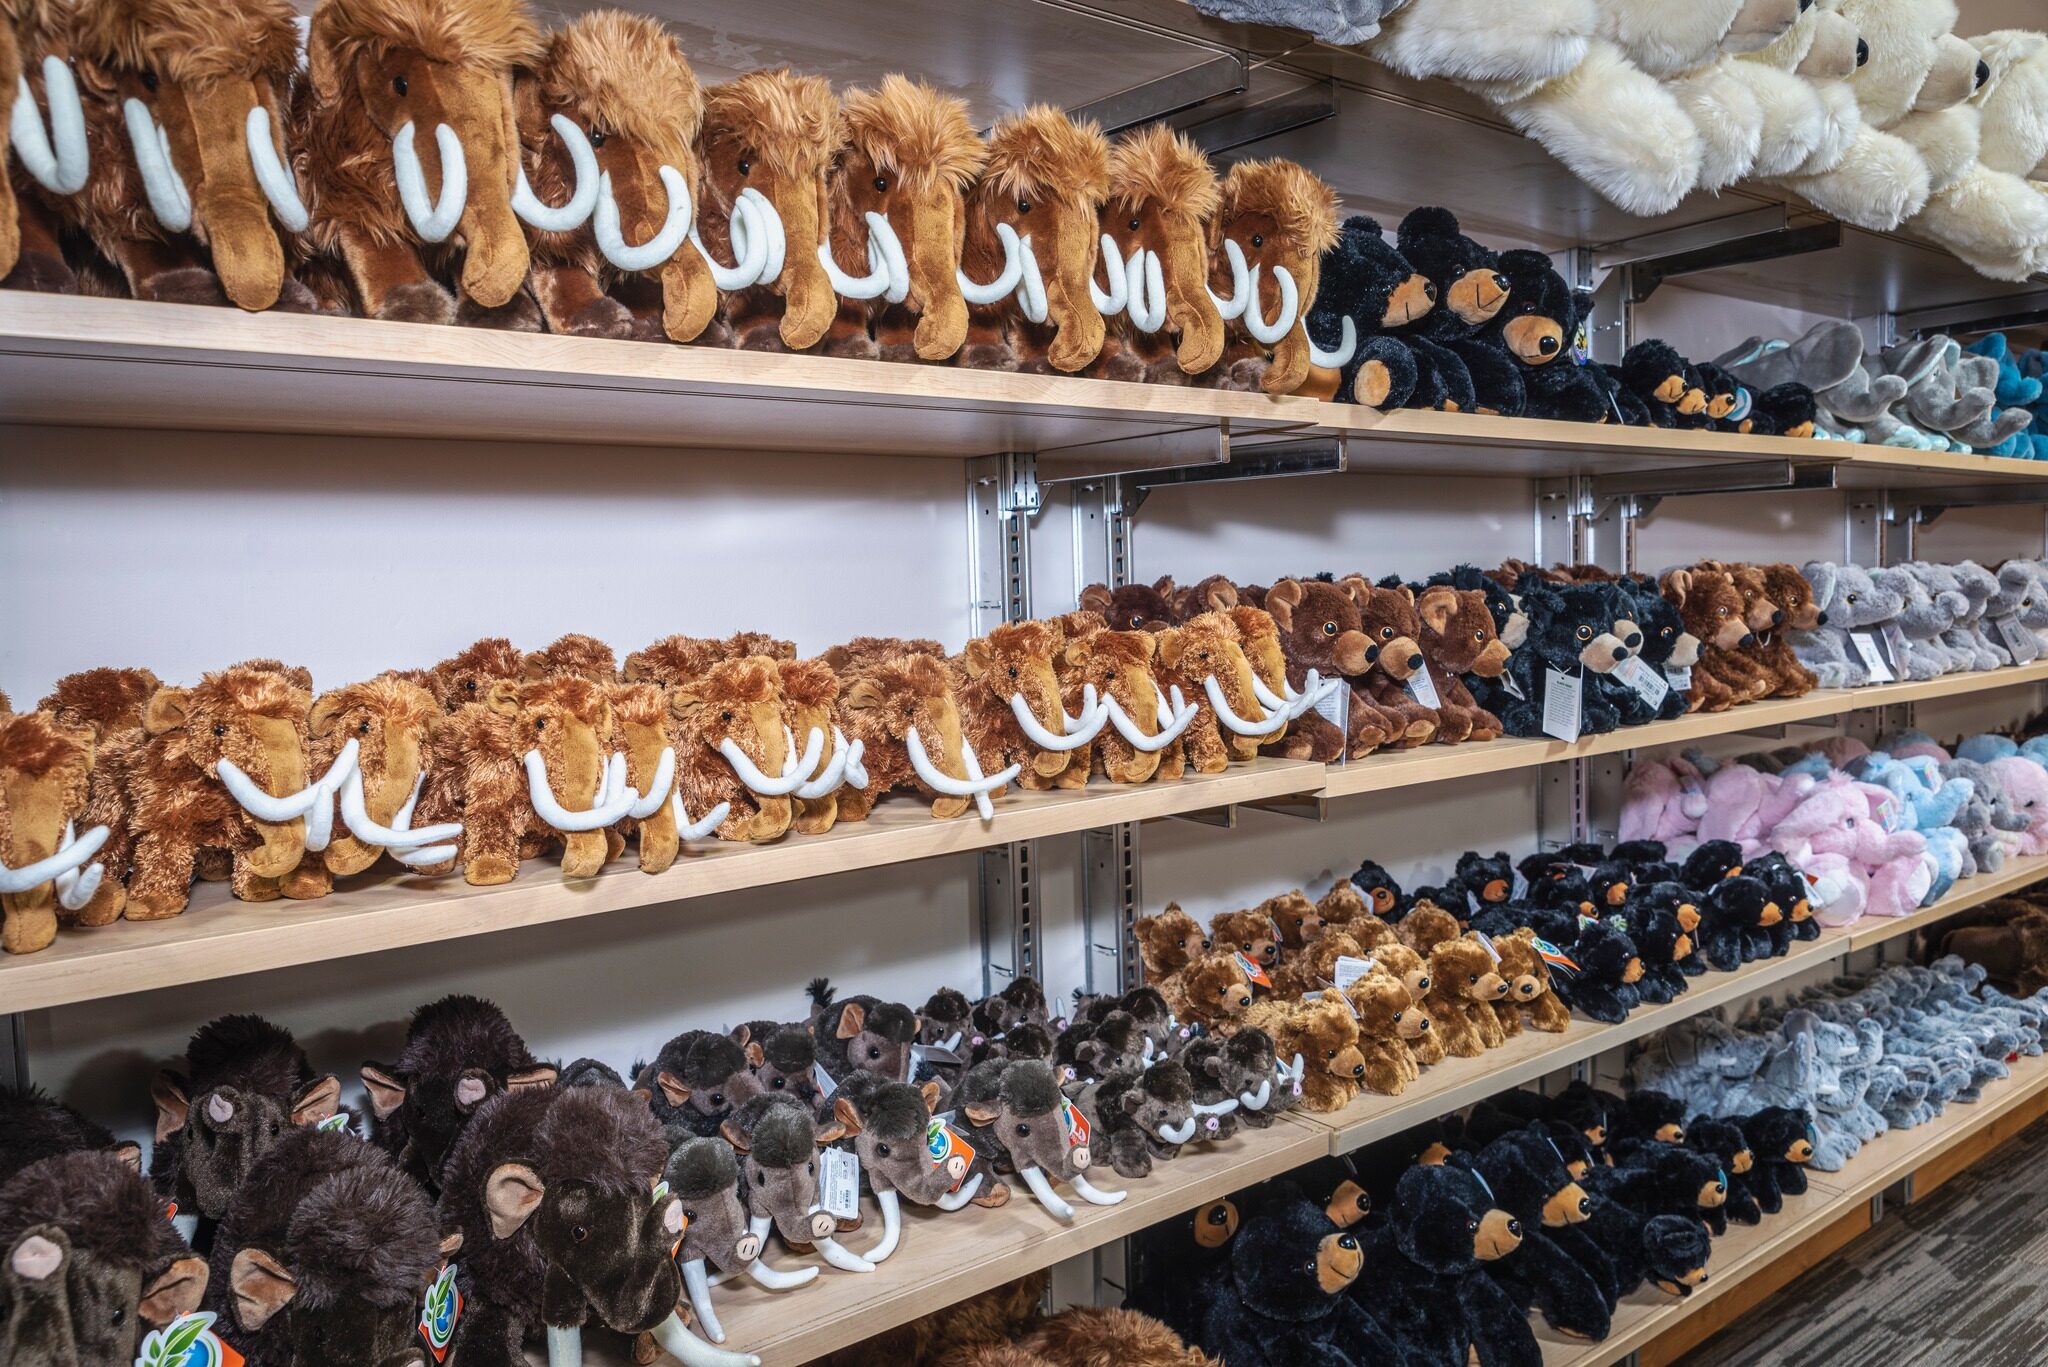 The Mammoth Site store is filled of stuffed mammoth plushies.